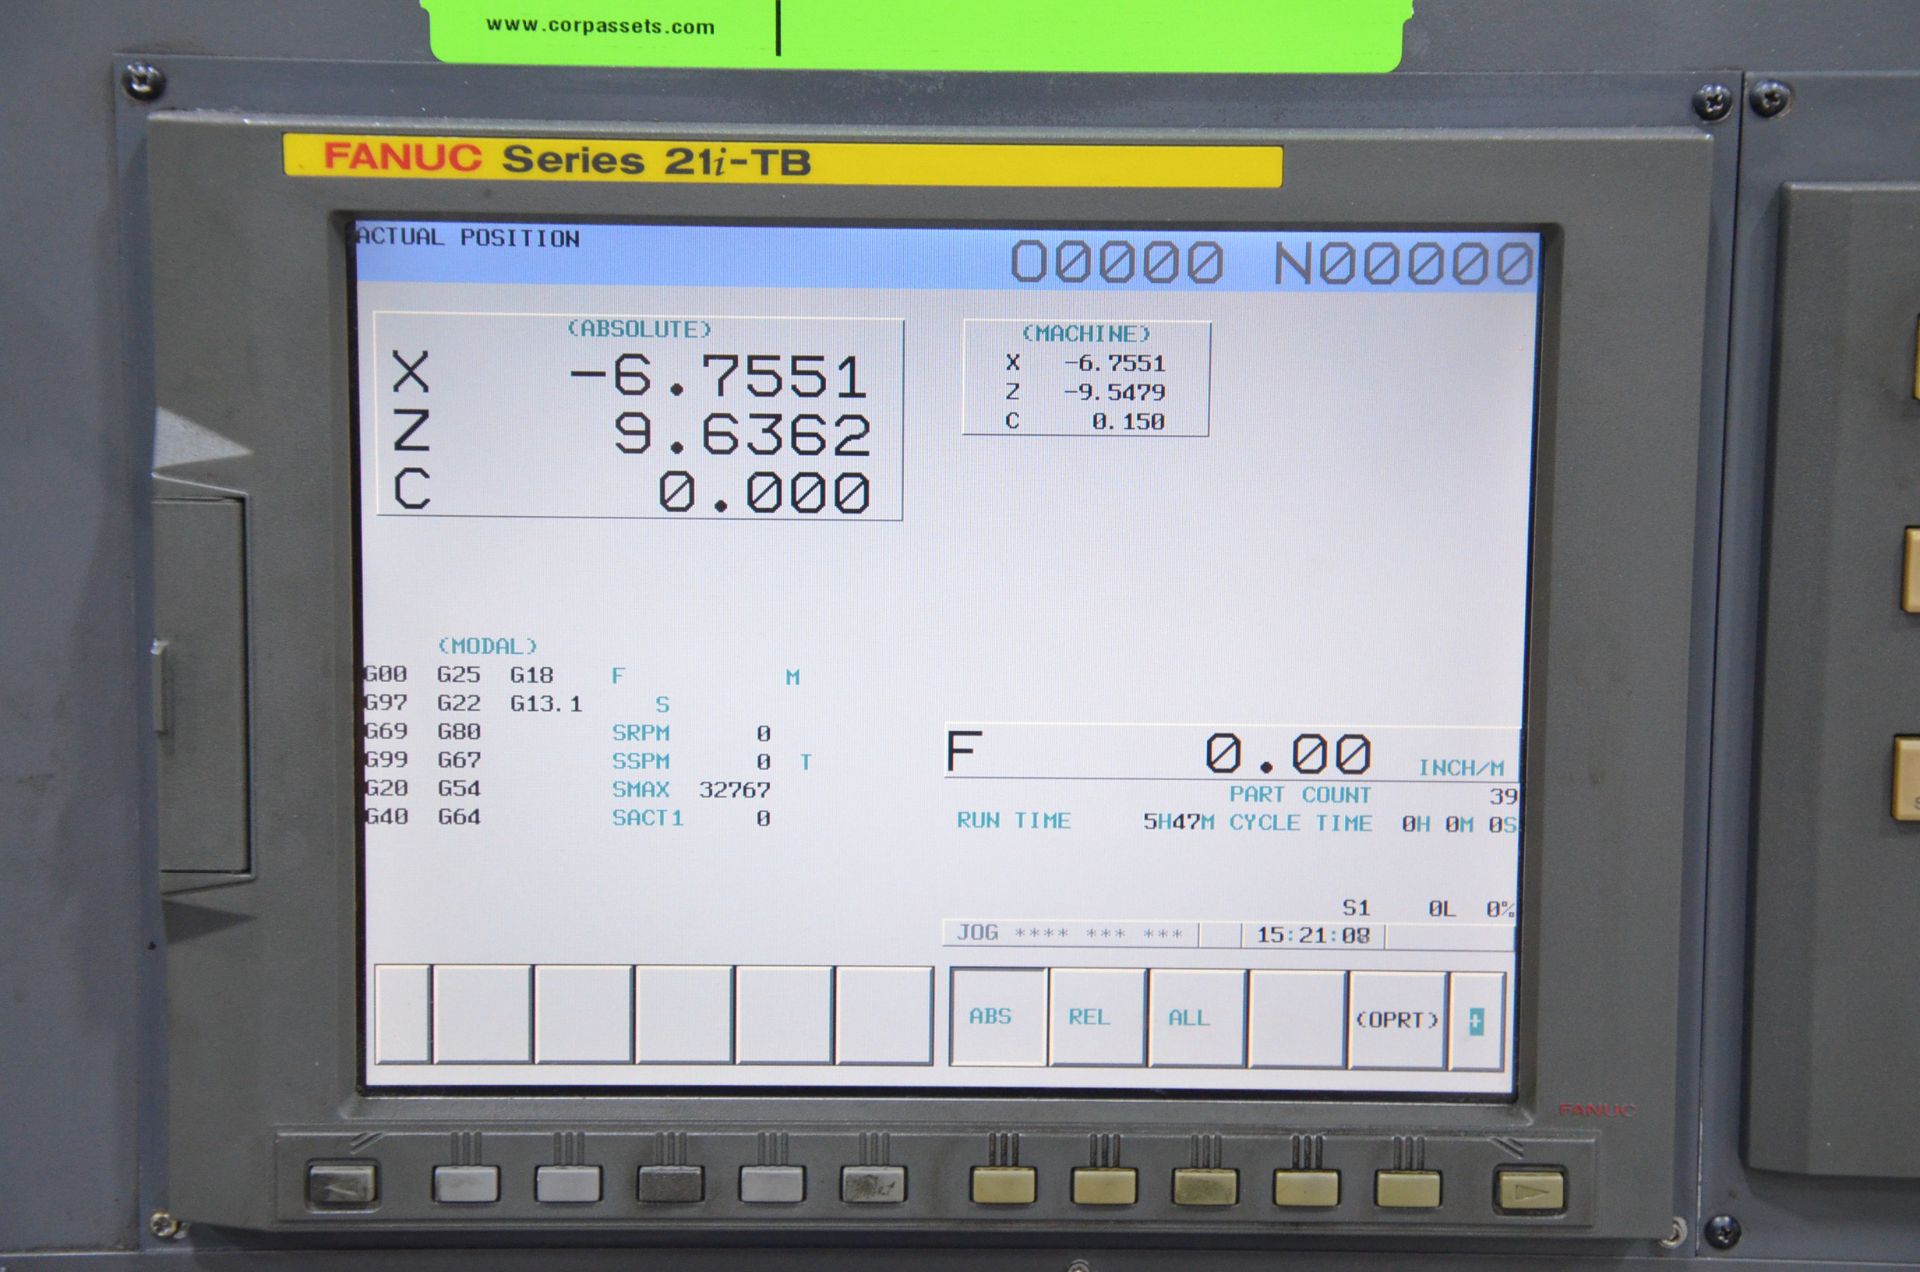 NAKAMURA-TOME SC300 CNC TURNING AND LIVE MILLING CENTER WITH FANUC 21I-TB CNC CONTROL, 22.04" SWING, - Image 9 of 16